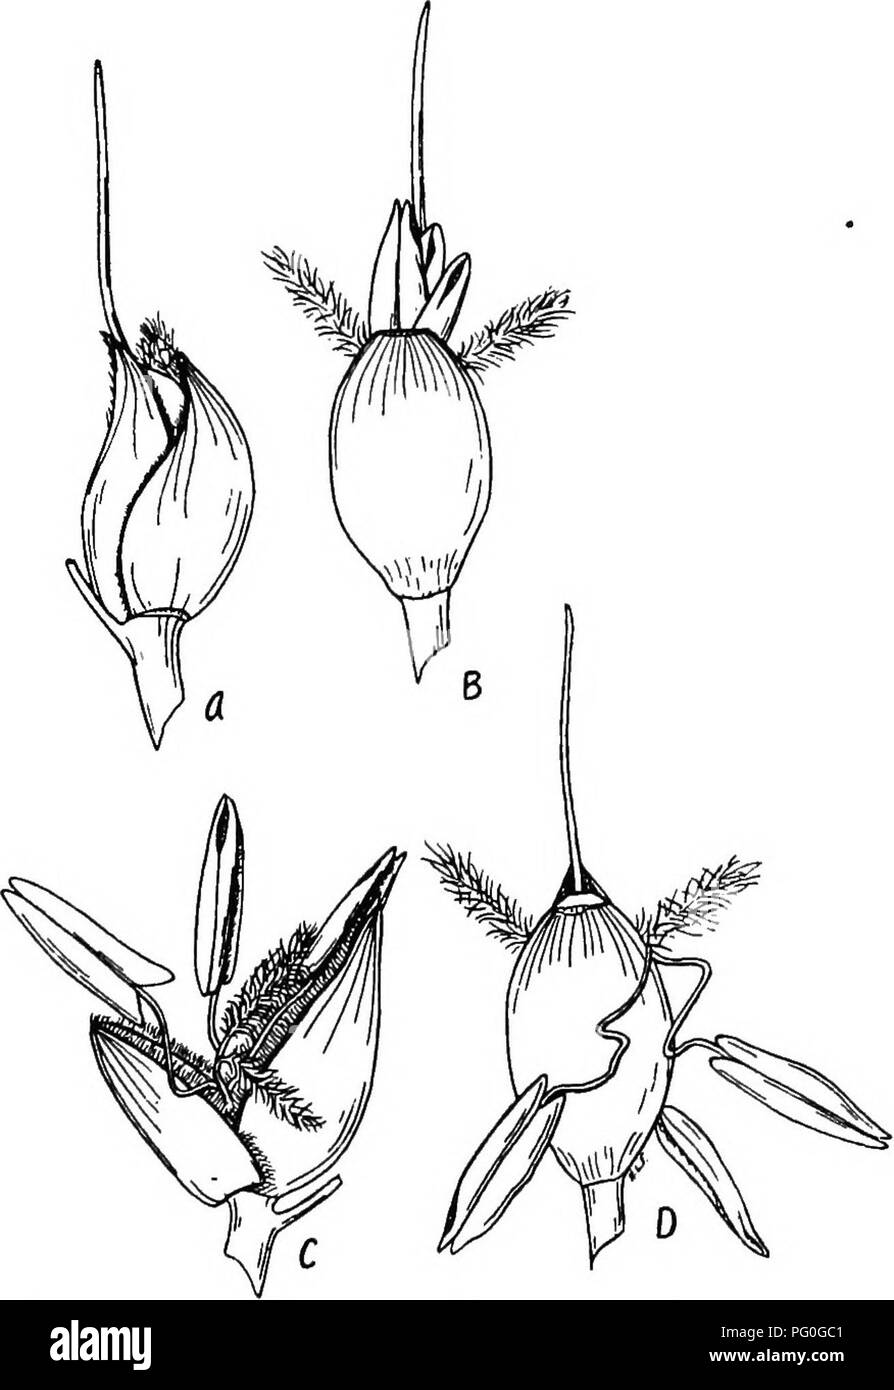 . The botany of crop plants : a text and reference book. Botany, Economic. ANDROPOGON SORGHUM 19s shedding anthers may be in contact at time of opening, and since the stigma is receptive at this time, some self-pollination must take place. Pollination between flowers of the same. Fig. 72.—Four stages in the opening of the spikelet of sorghum (Andropogon sorghum). X S, plant is very common. The upper flowers are shedding pol- len in abundance, as the receptive stigmas of lower flowers are opening. And, in the light breeze of the morning, the head'is. Please note that these images are extracted  Stock Photo